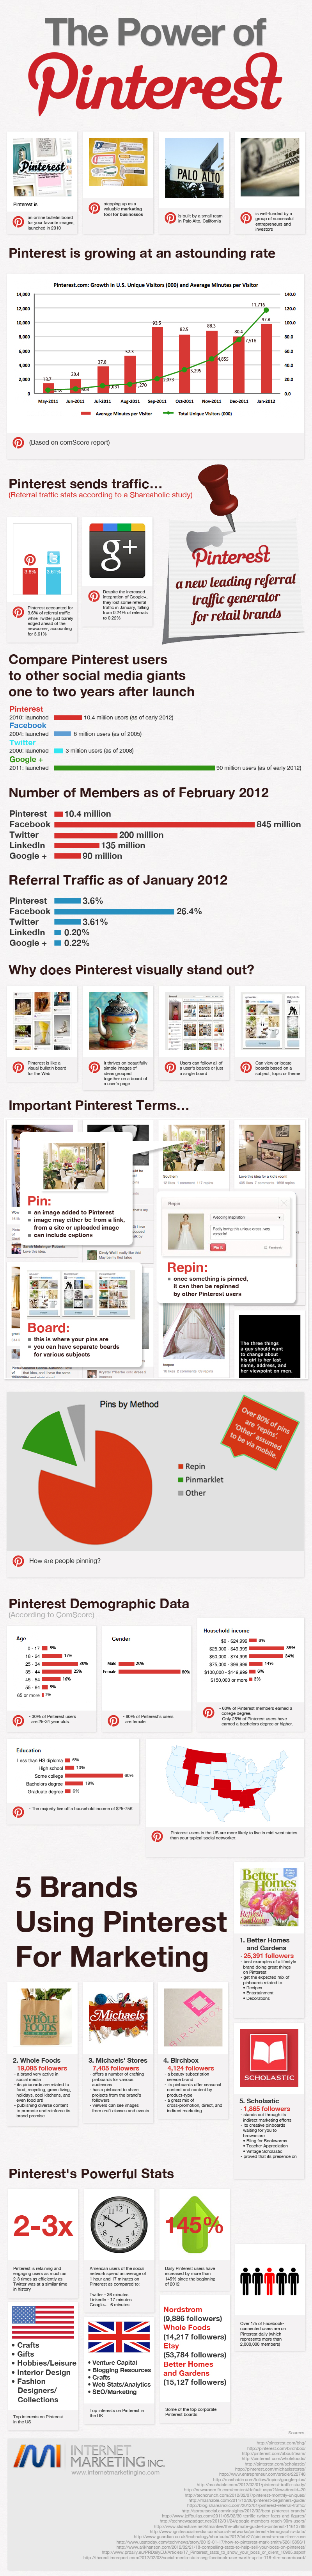 The Power of Pinterest [Infographic]